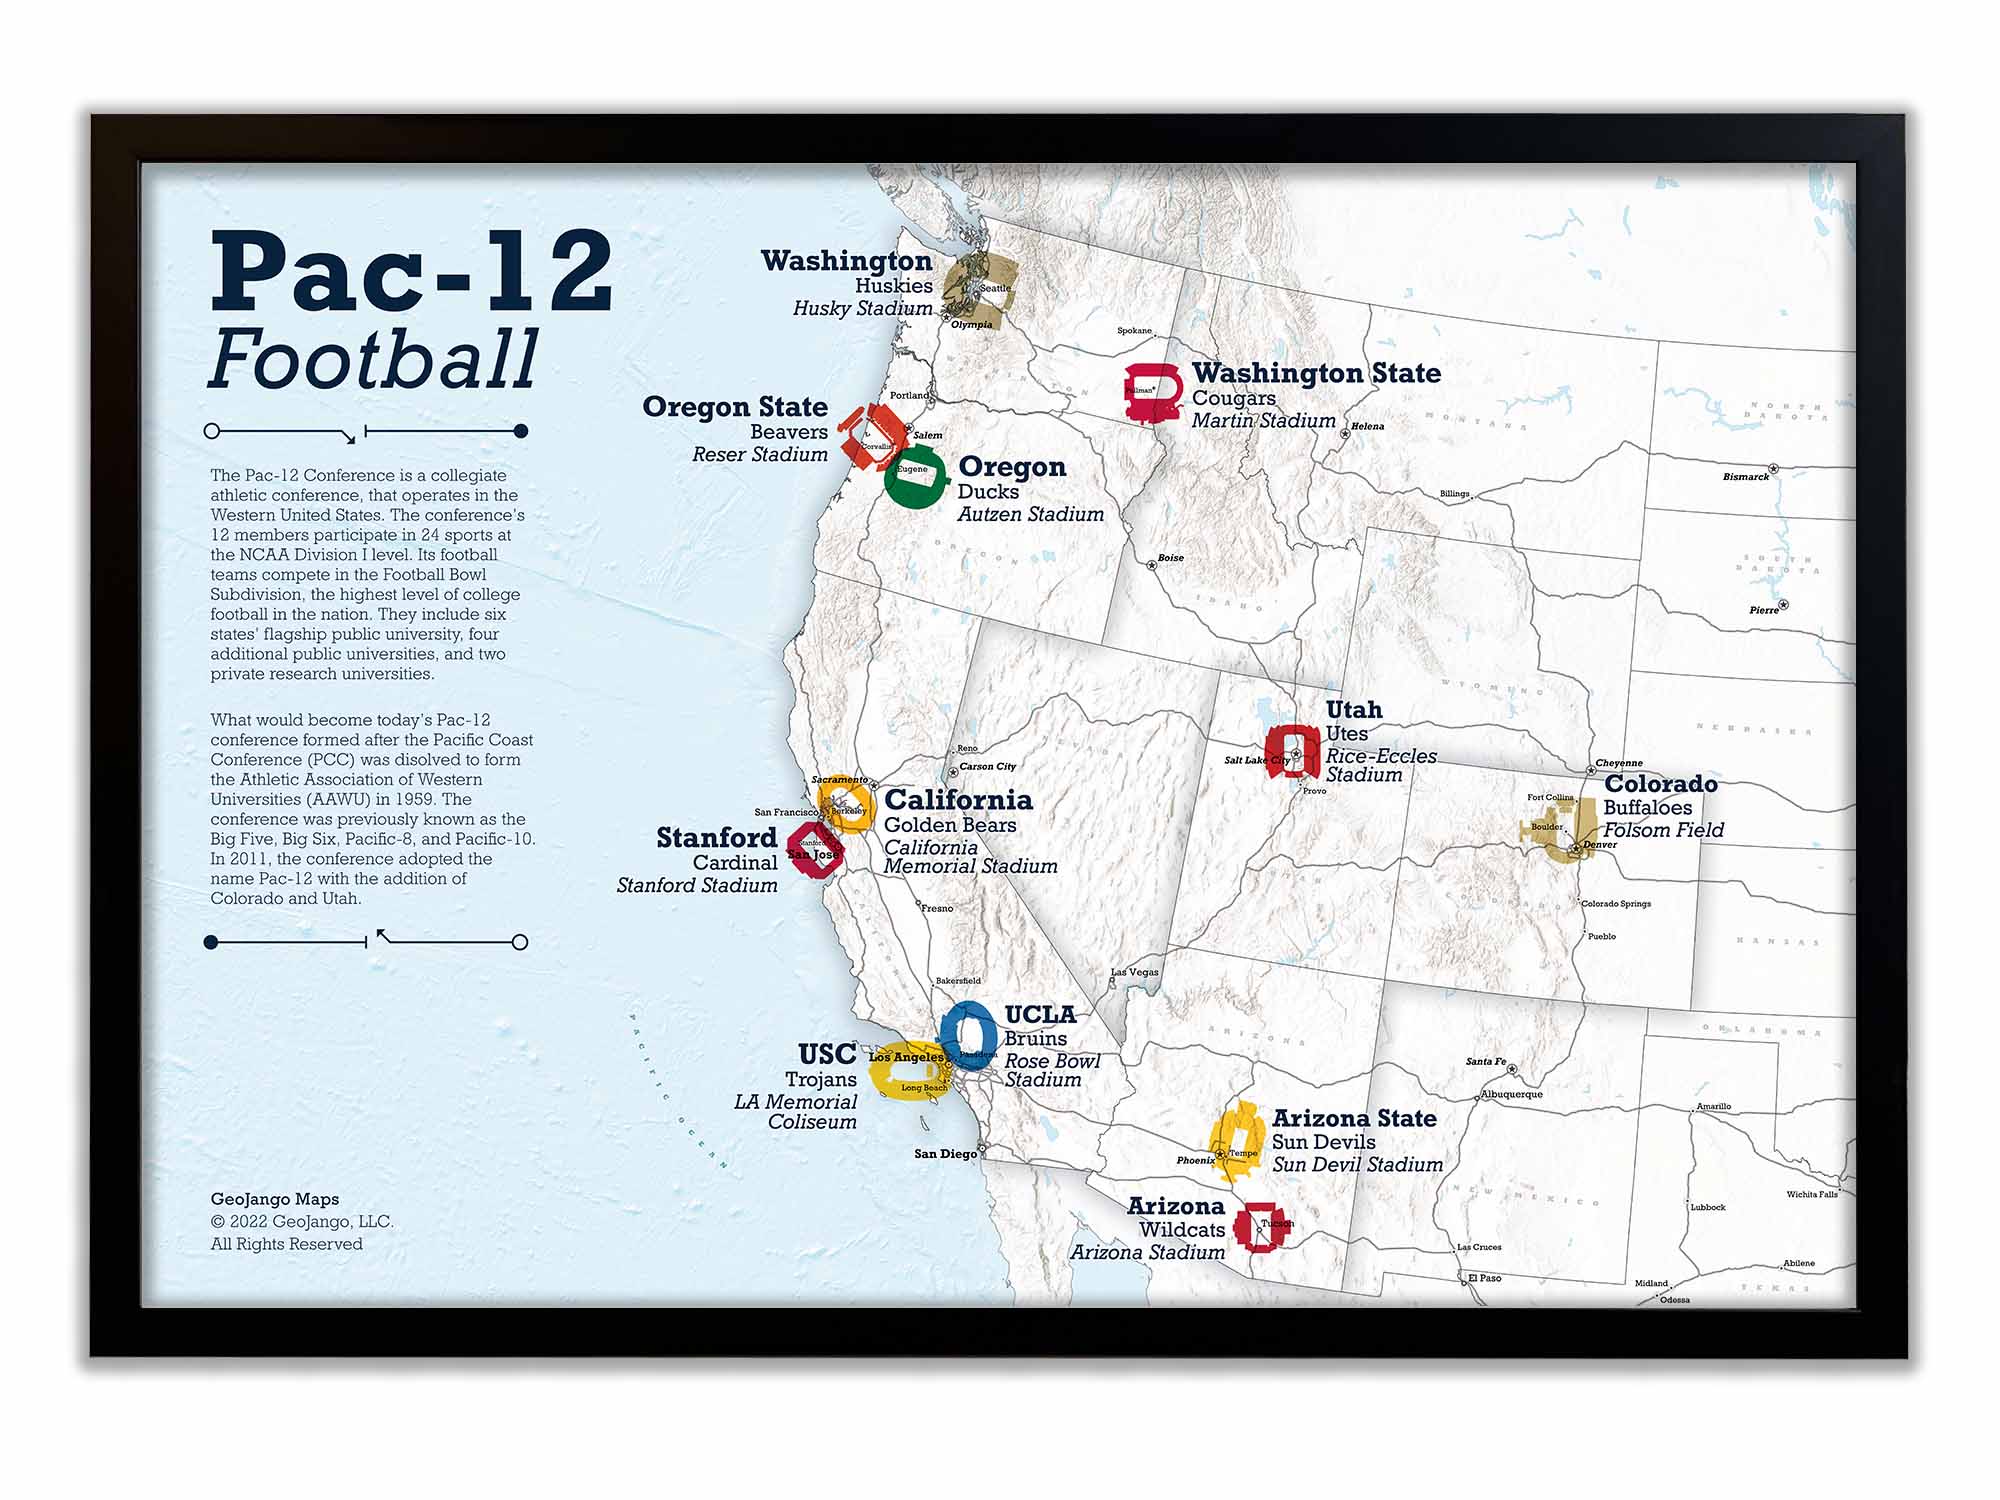 Map displaying locations of teams in the Pac-12 Conference, including the USC Trojans